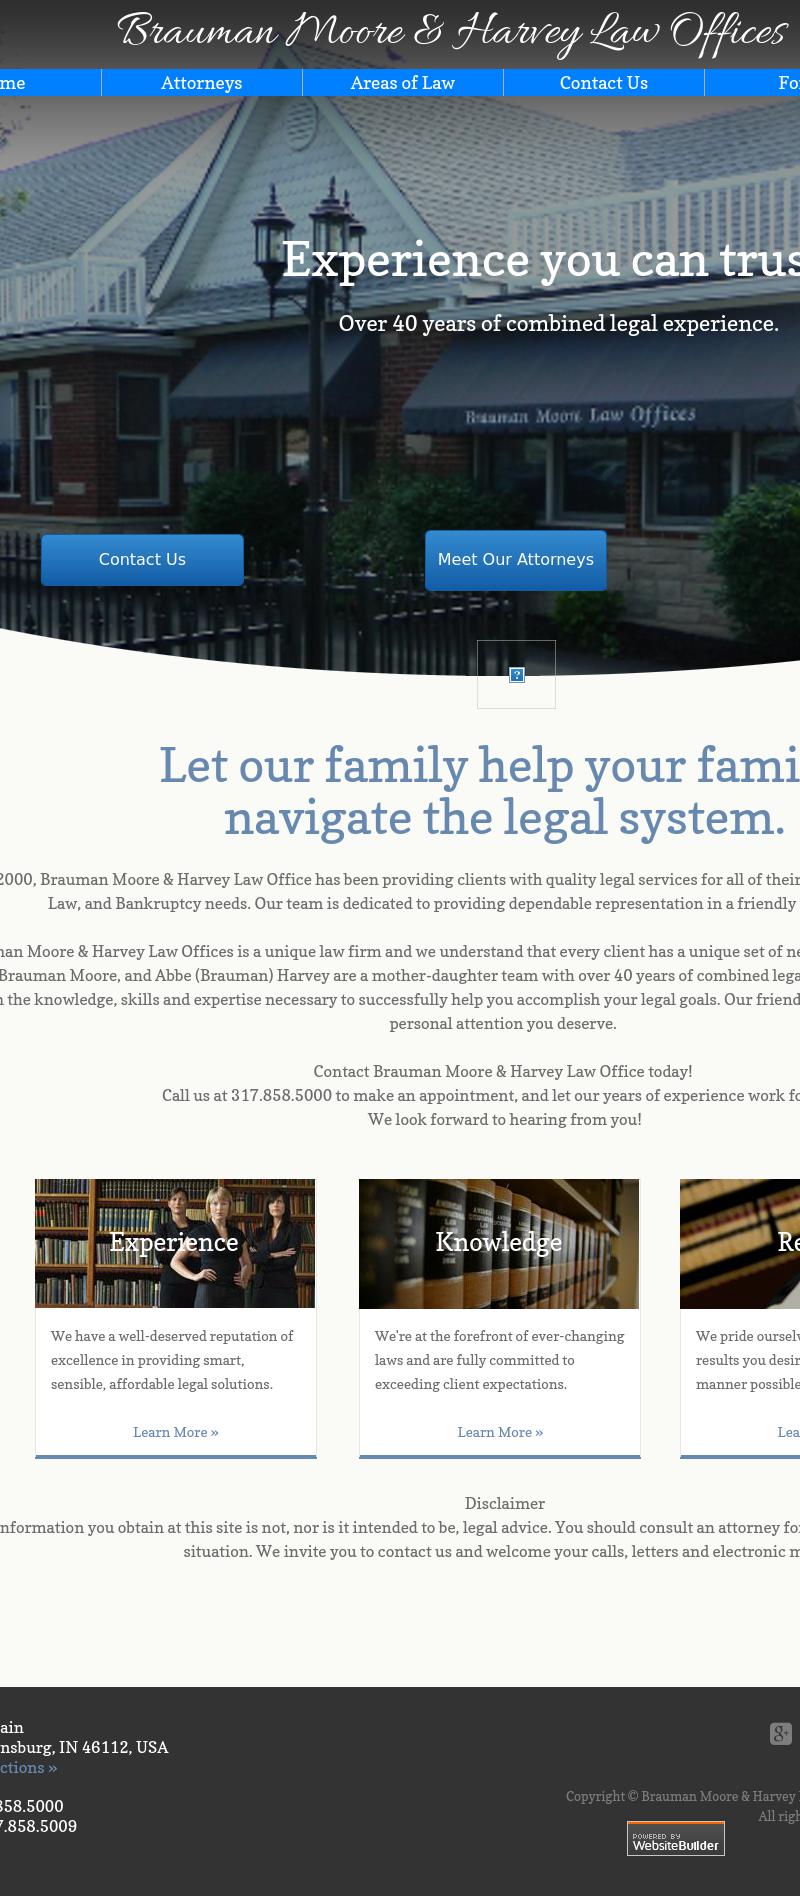 Brauman Moore & Harvey Law Offices - Brownsburg IN Lawyers